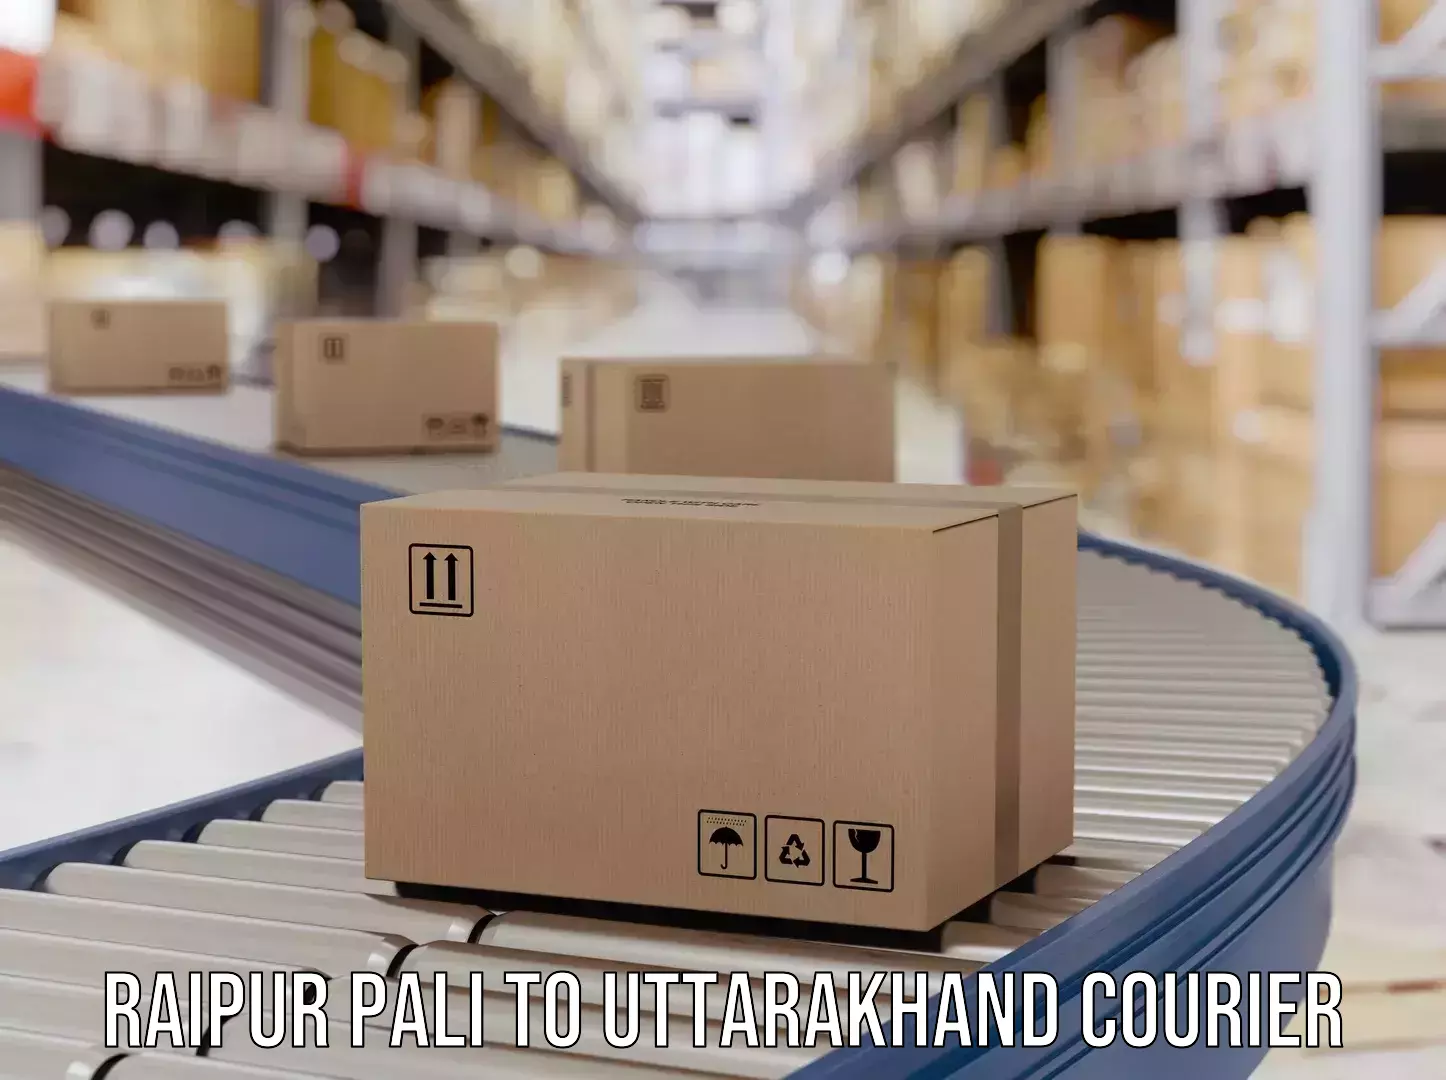 Special handling courier Raipur Pali to Almora